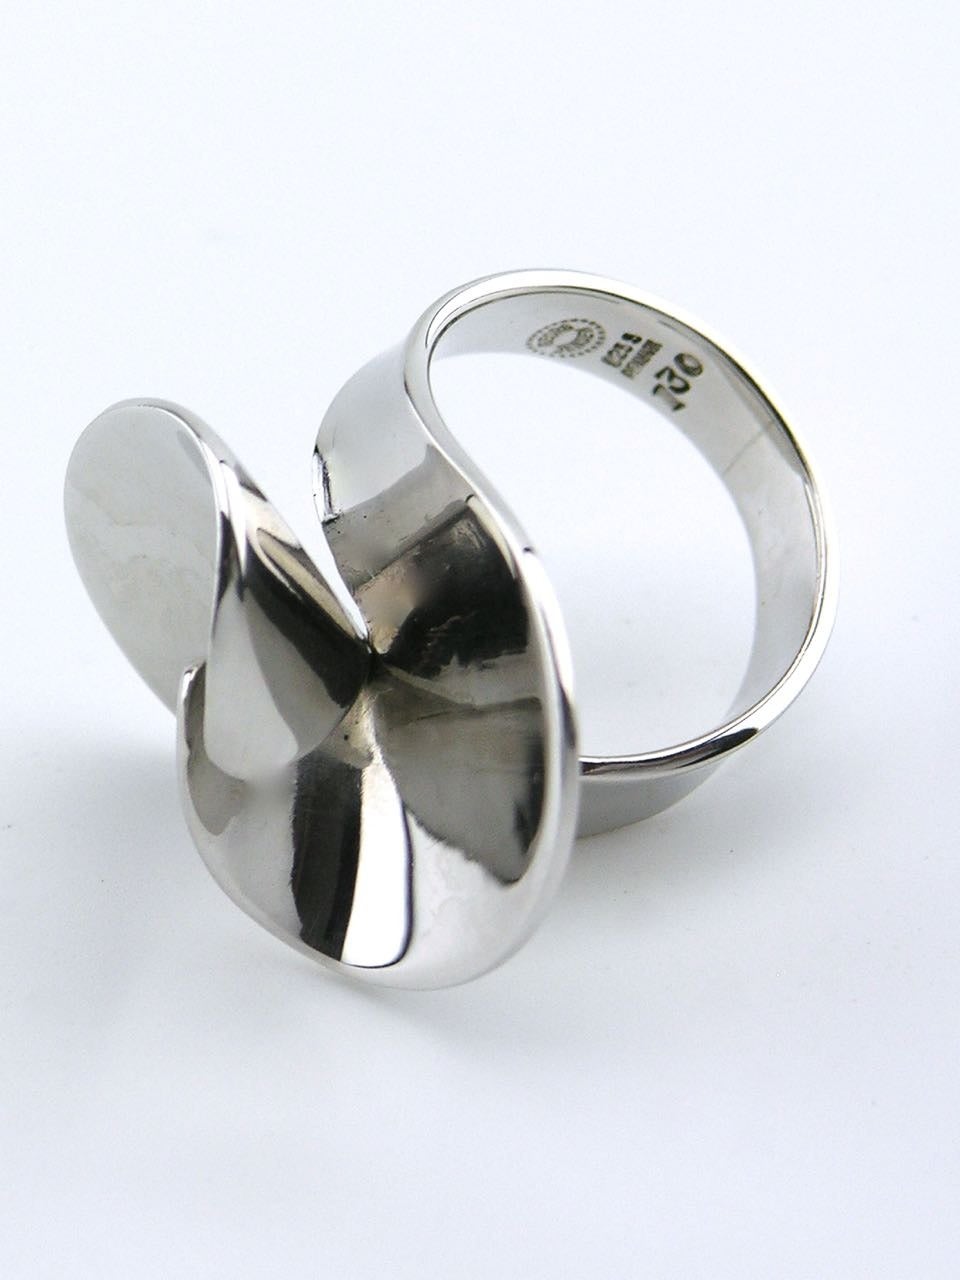 A ring in a wrap bypass design; each end with a flared and curved shape that interlocks with the other - marked for Georg Jensen design number 130

Current size K ( US 5.125) Can be resized if required